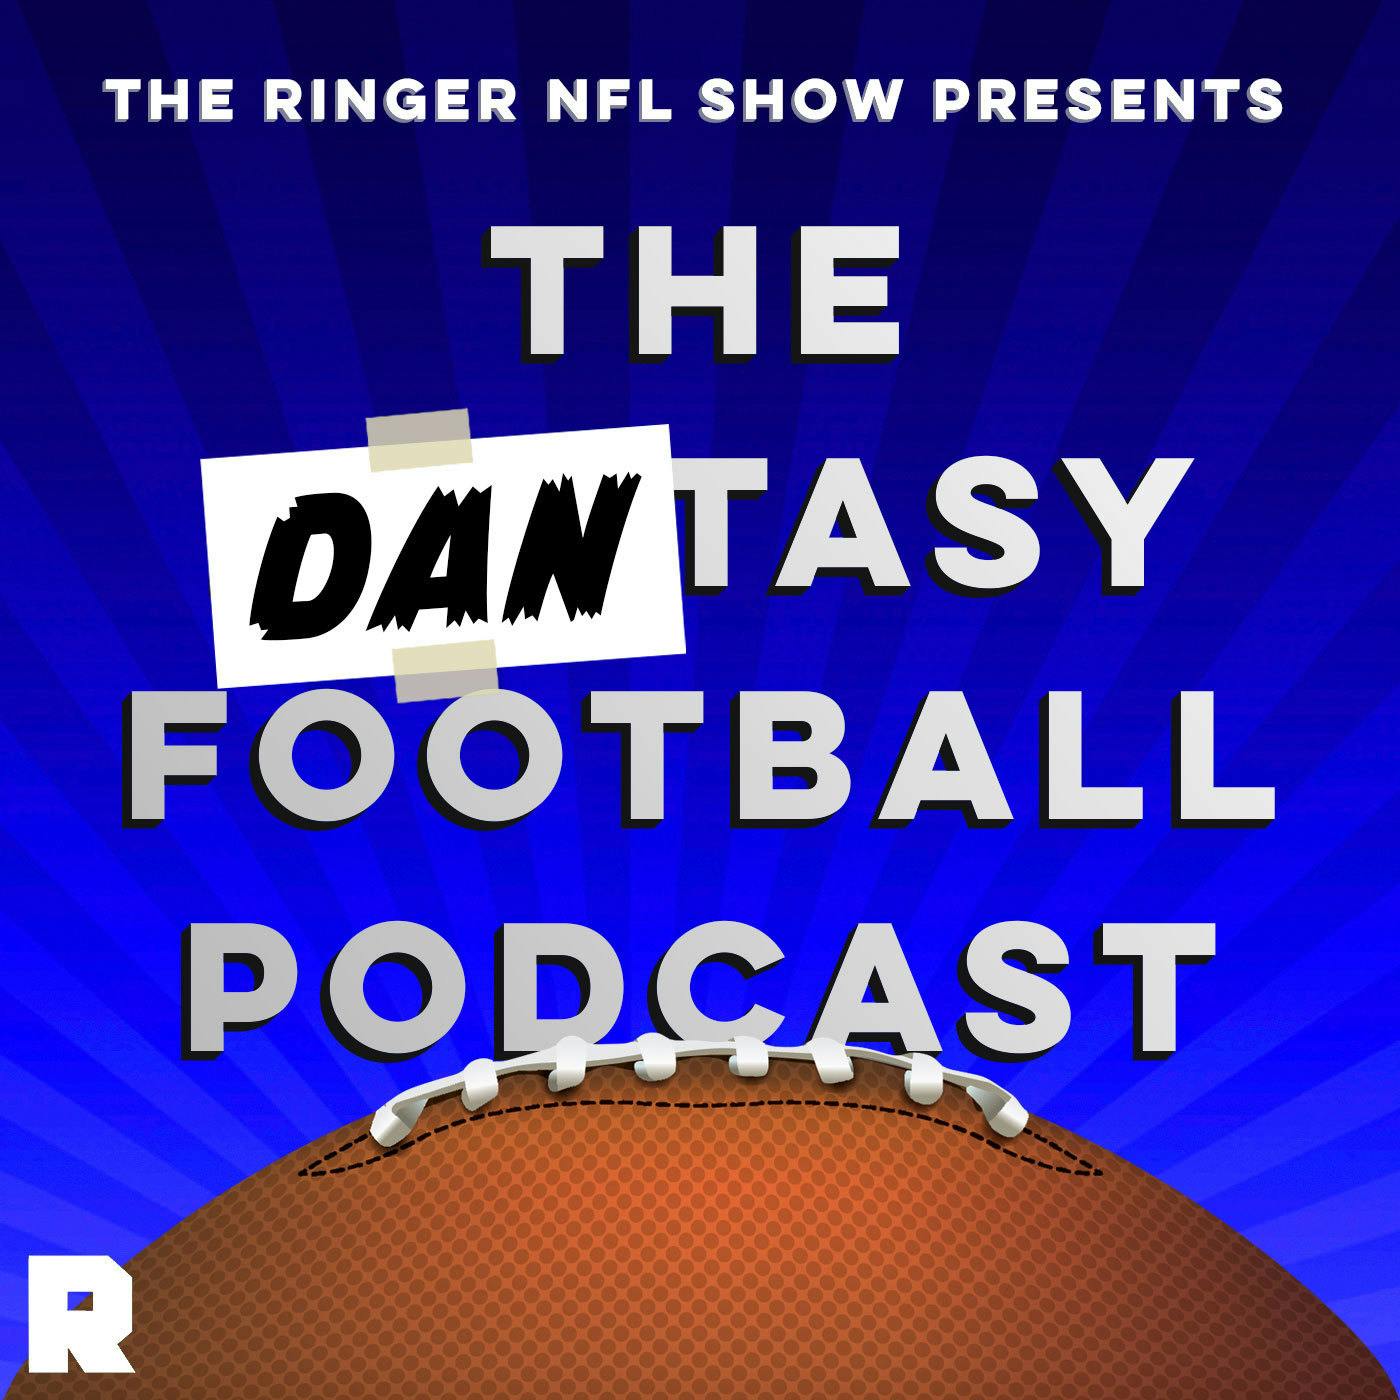 Fading Fournette, Backing Back-Ups, and More Daily Decisions | The Dantasy Football Podcast